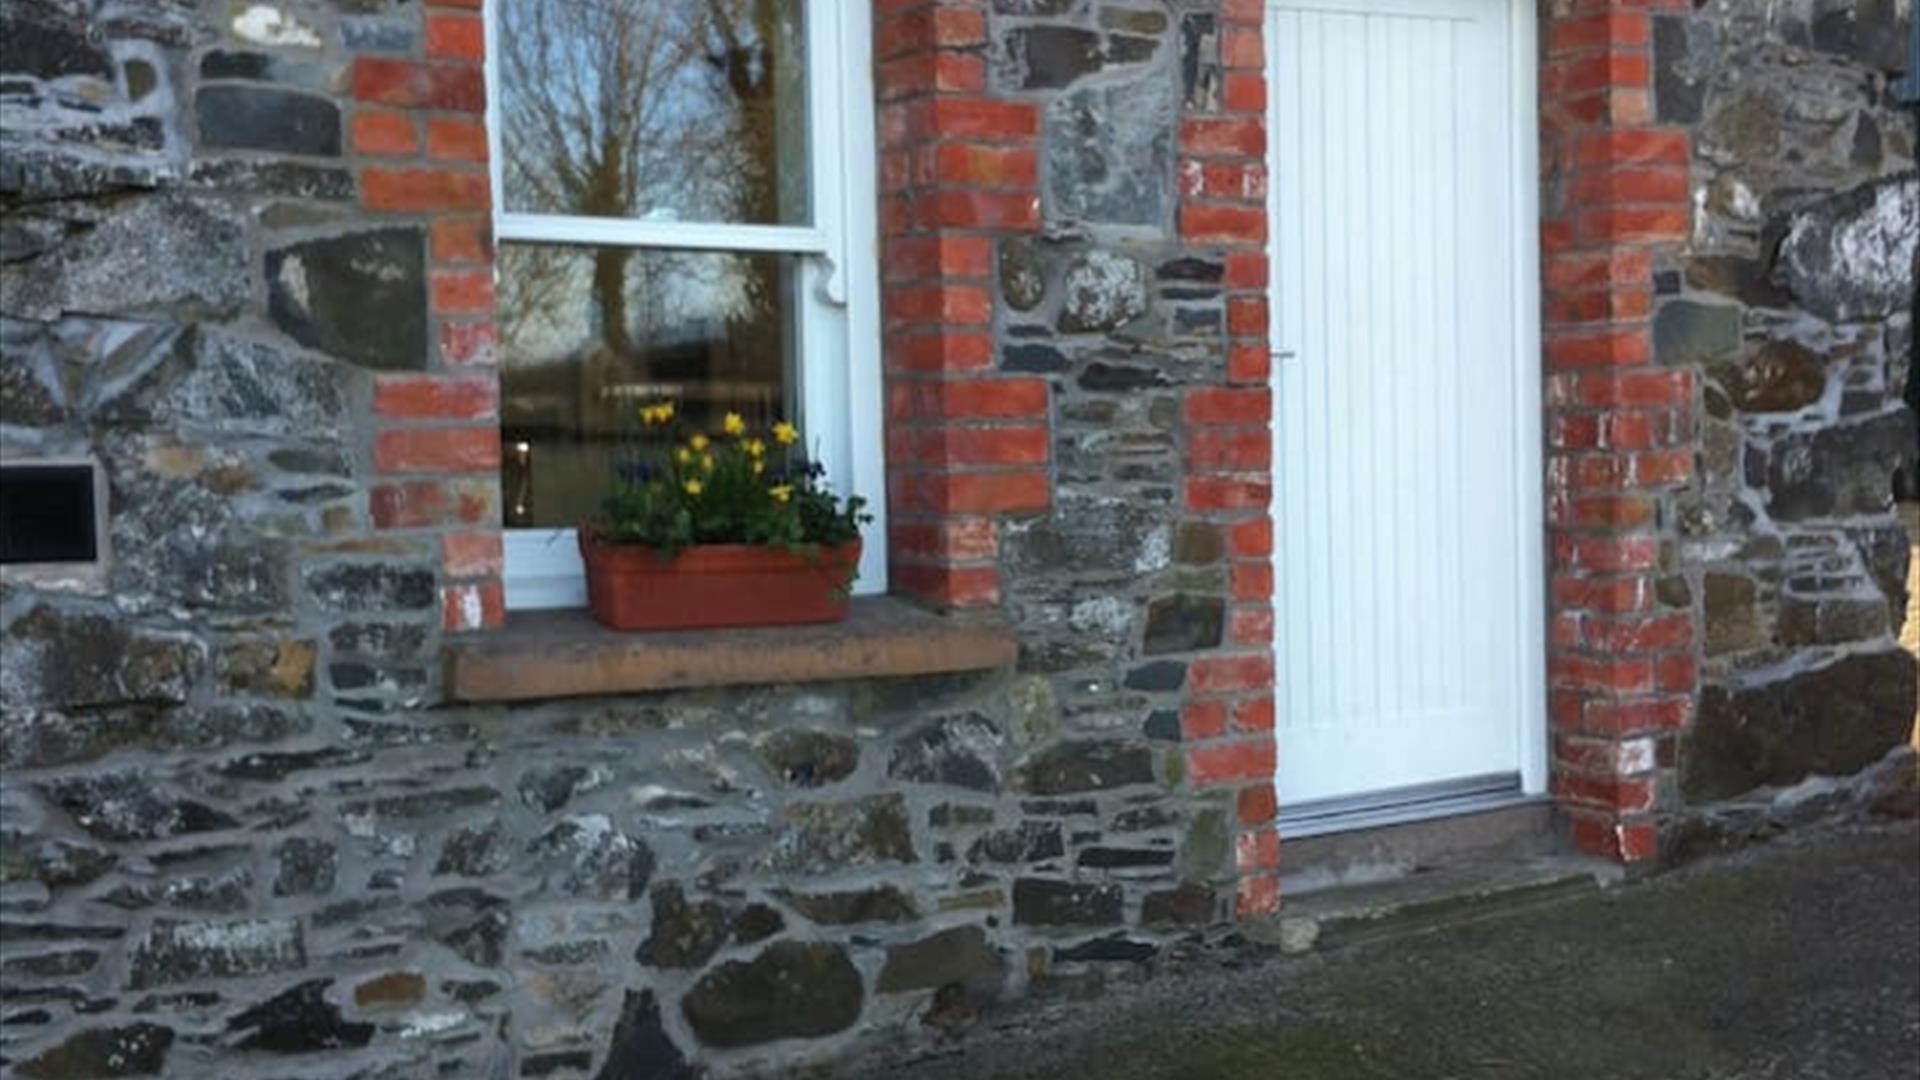 Image is of a stone cottage with a white front door and flowerbed on the window sill